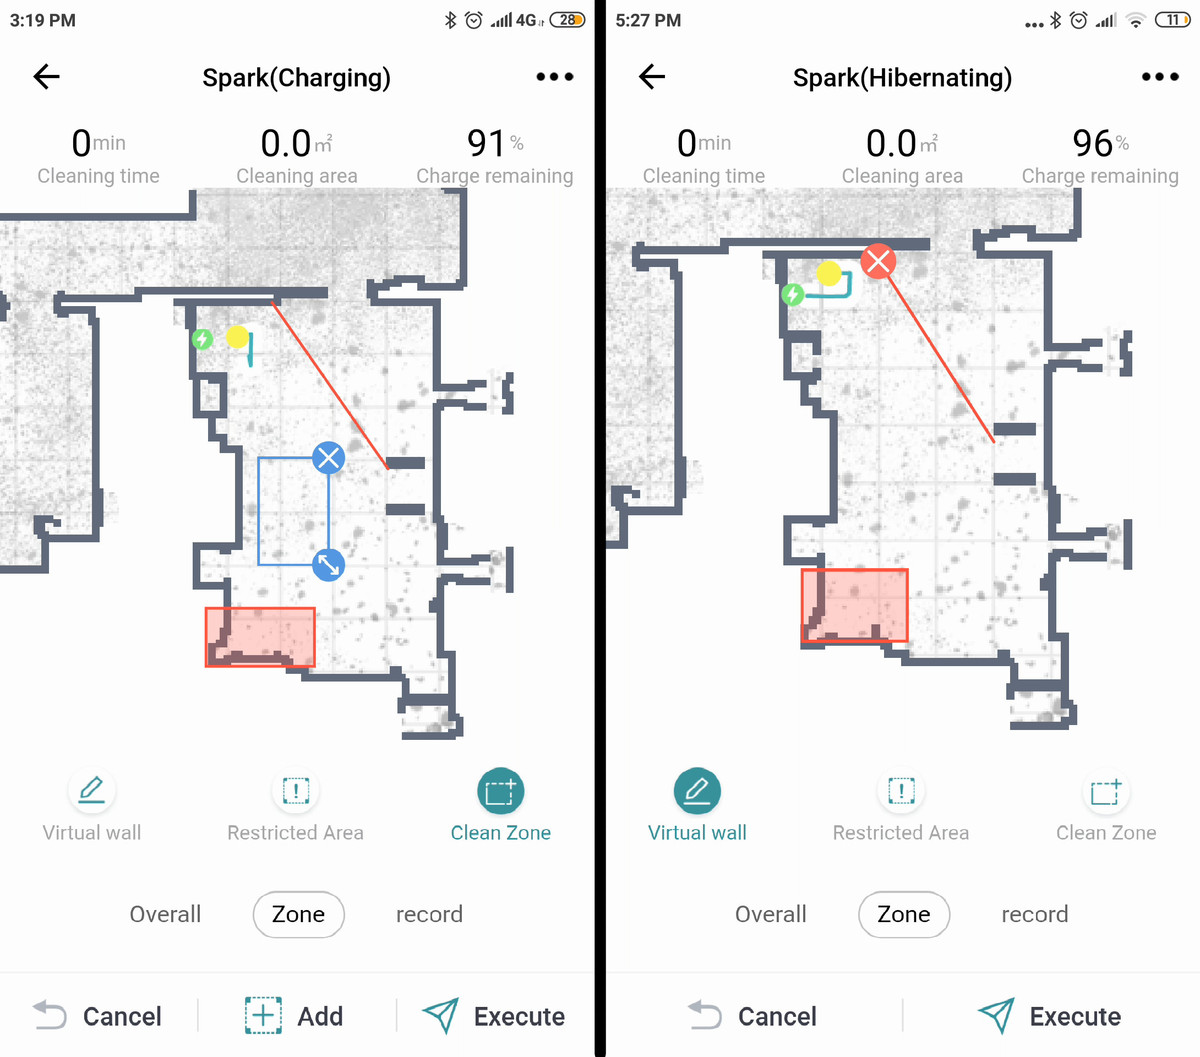 Zigma Spark app screenshot. Left: Zone cleaning setup. Right: restricted areas and virtual walls setup